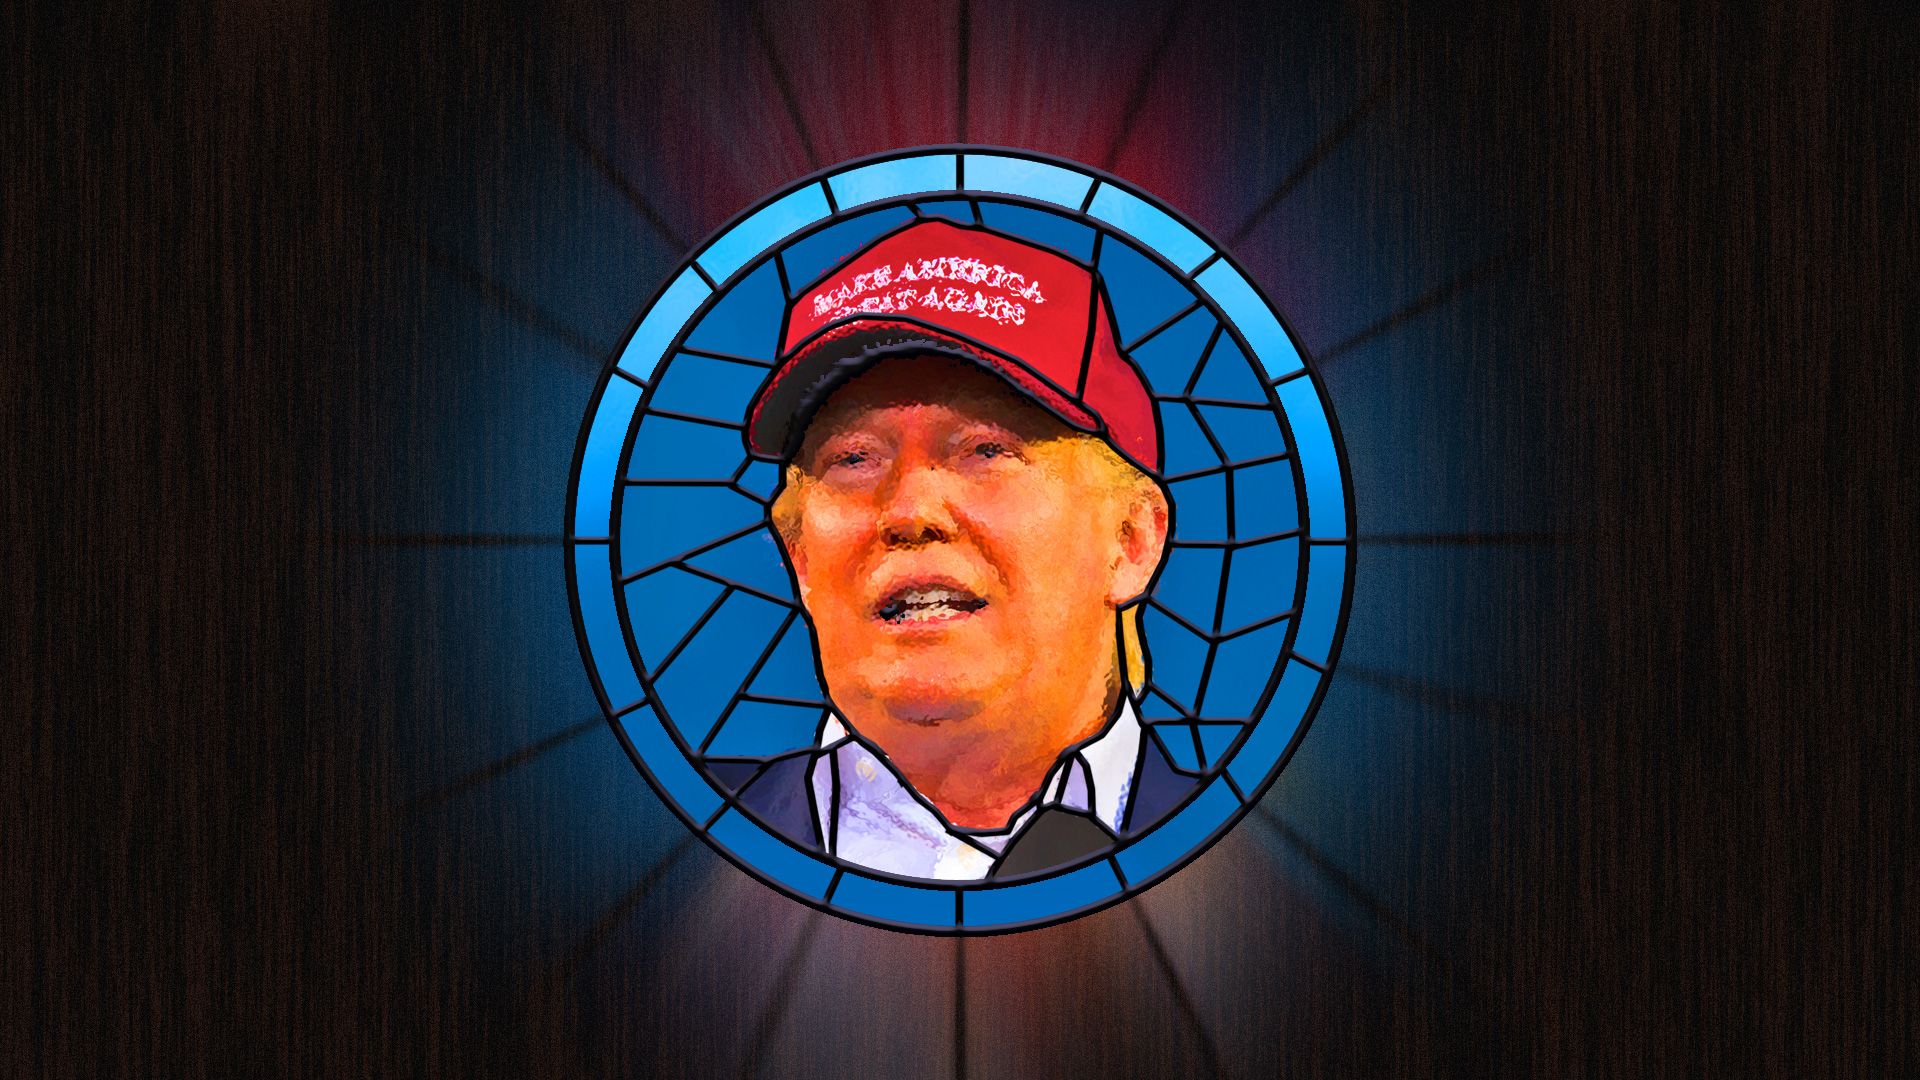 A stained glass portrait of Trump